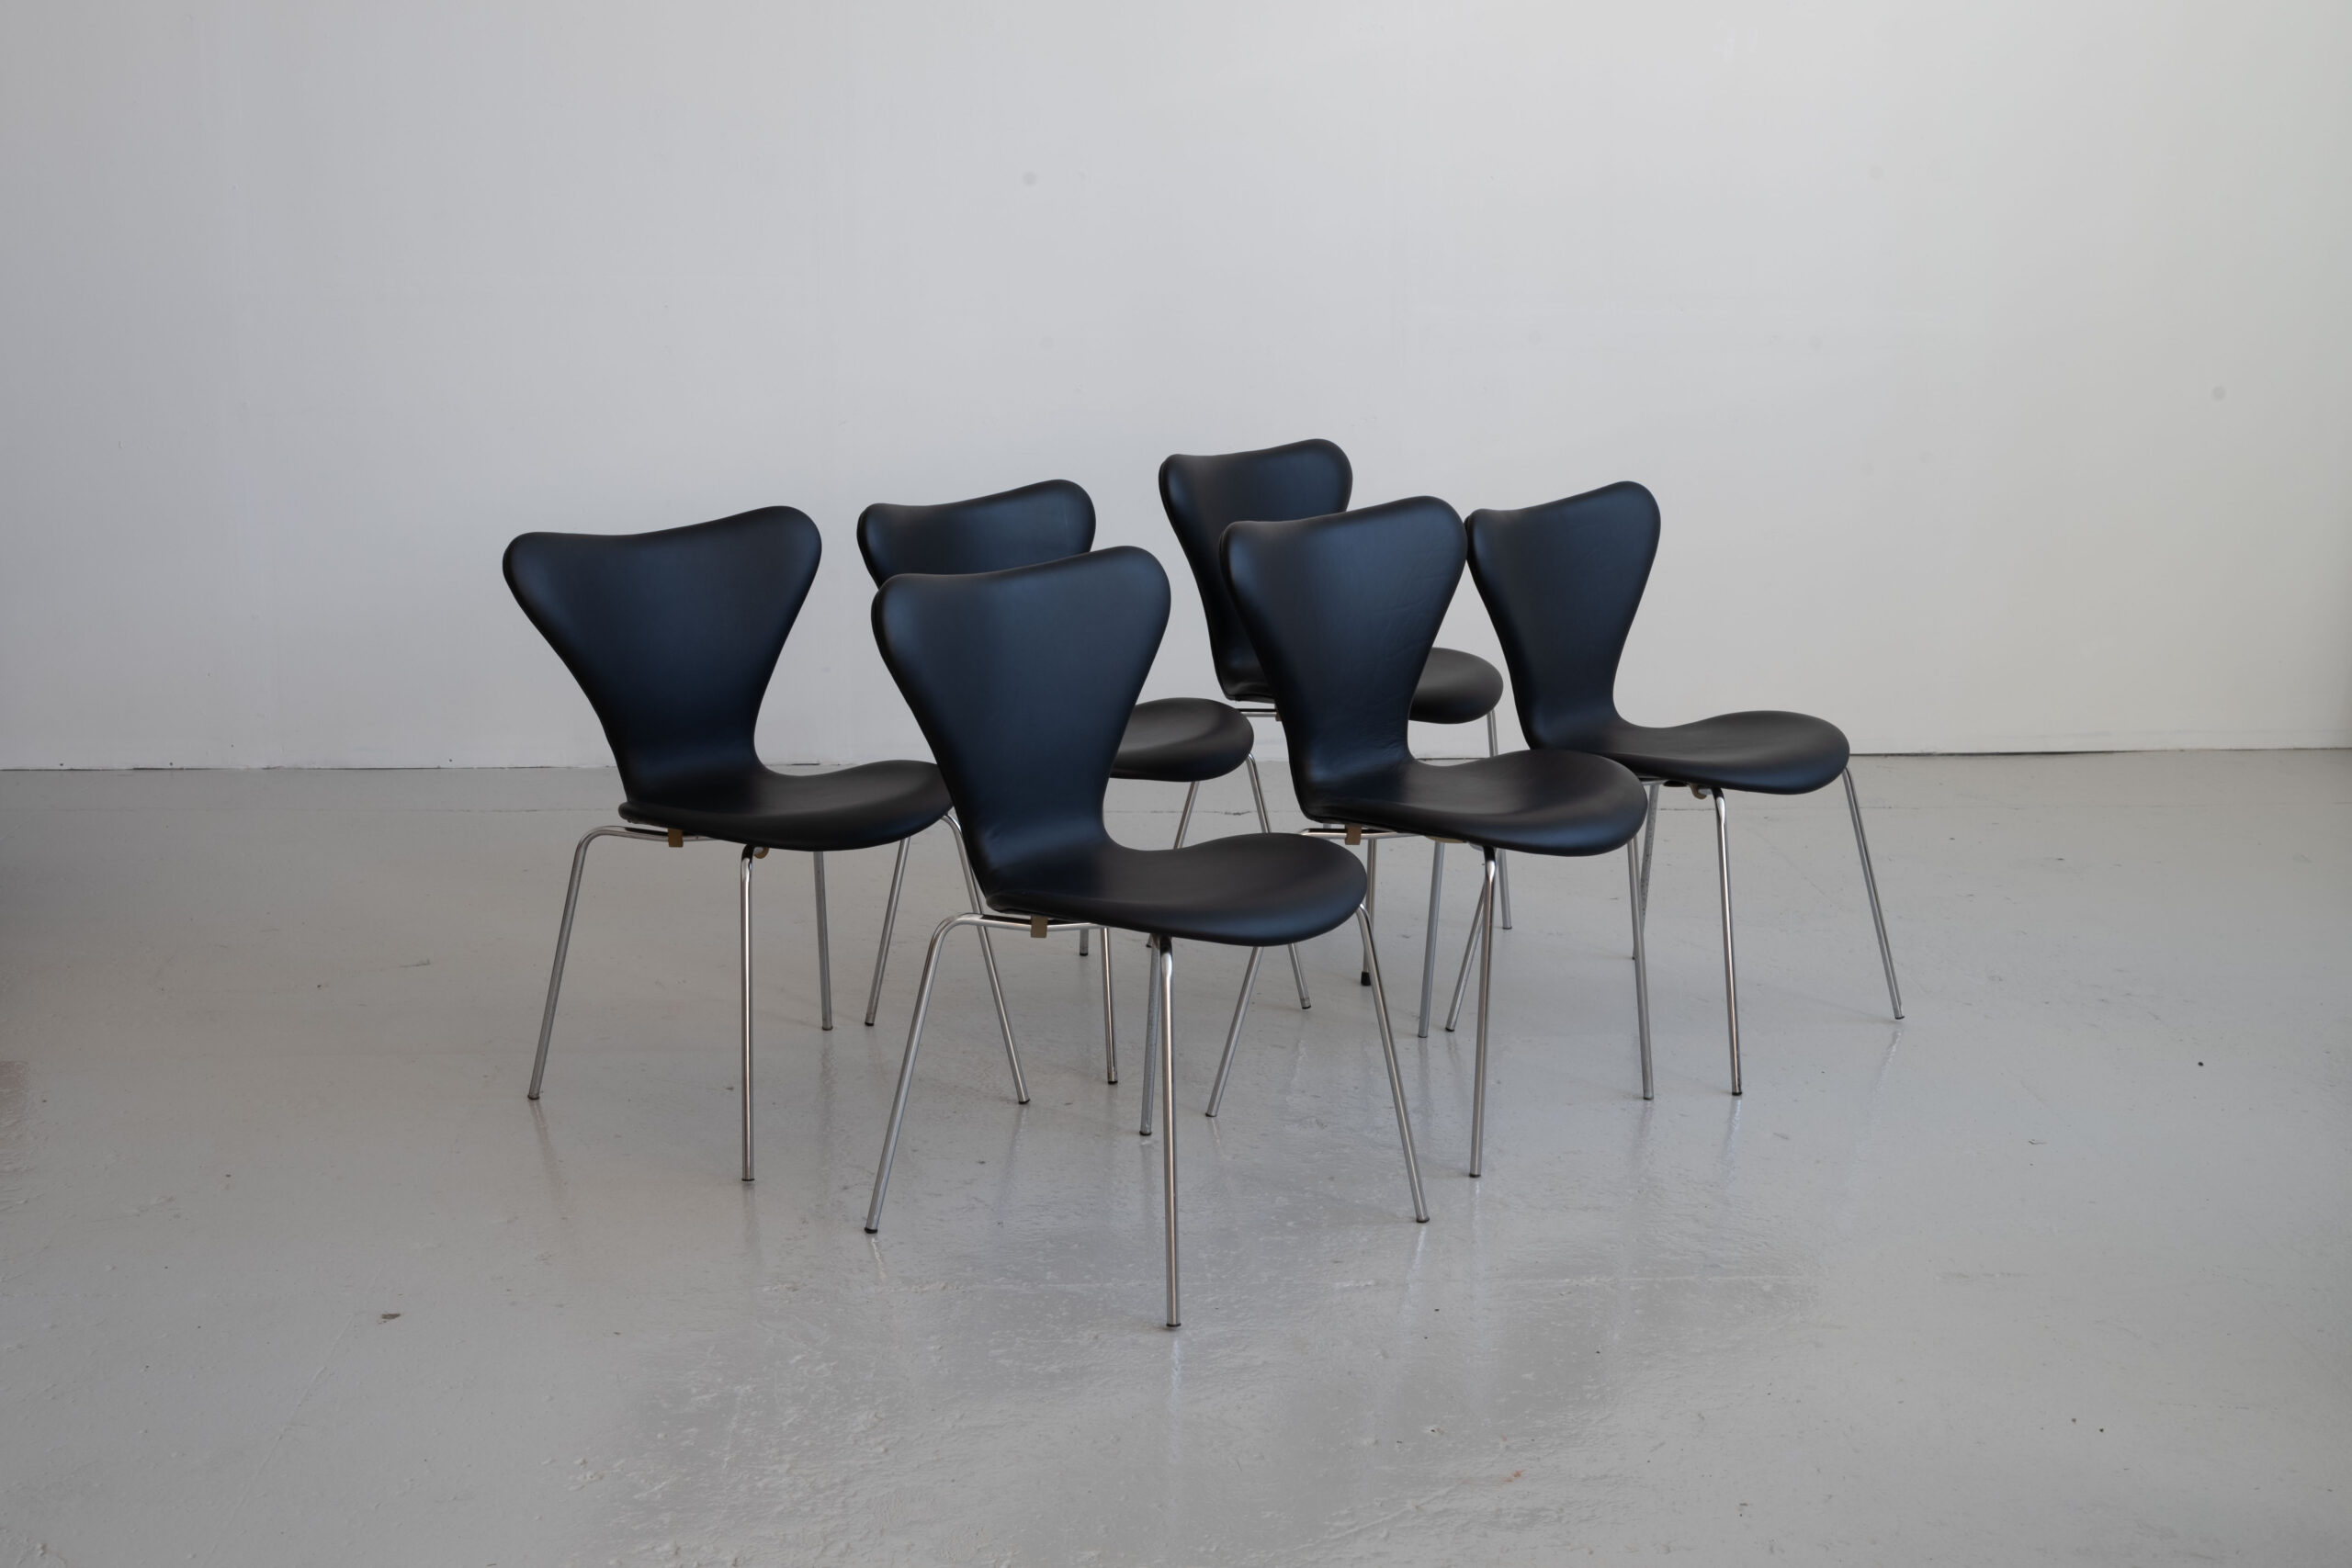 *RESERVED* Arne Jacobsen 7 chairs upholstered in black leather